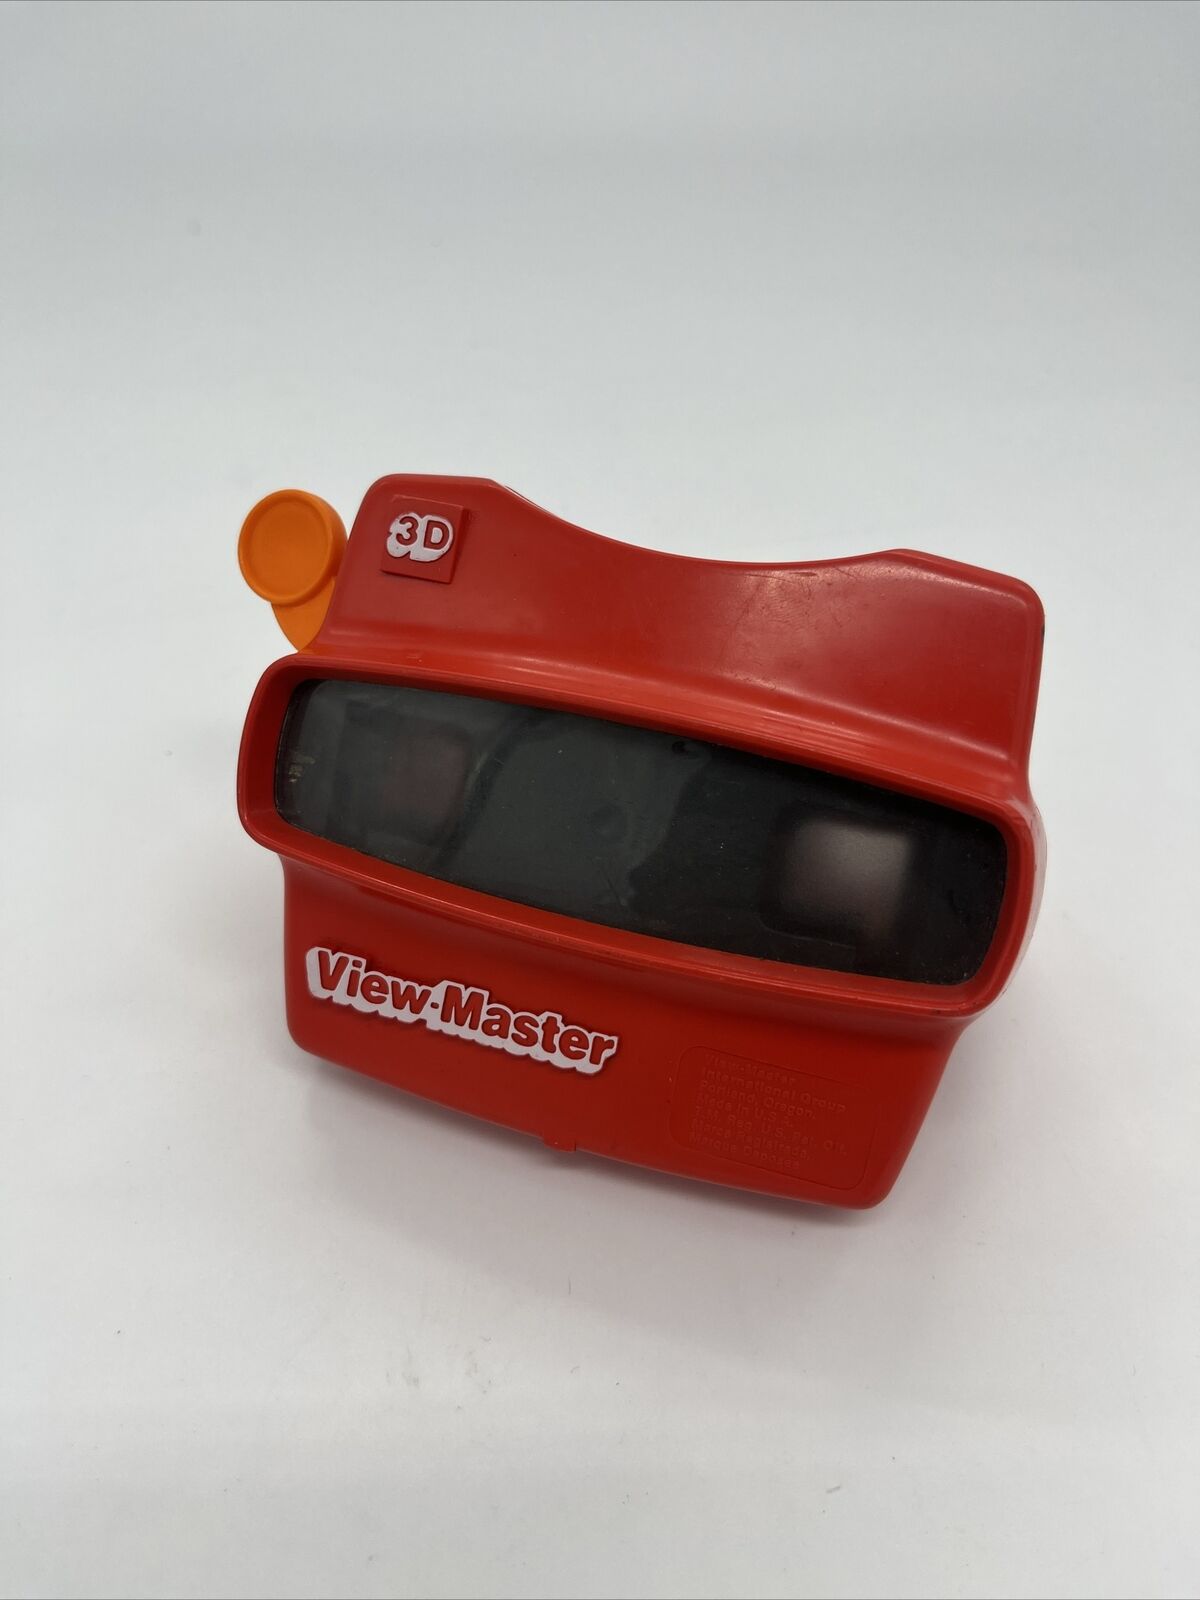 Vintage View Master 3D Viewer Red Classic Viewmaster Toy Slide Viewer USA 